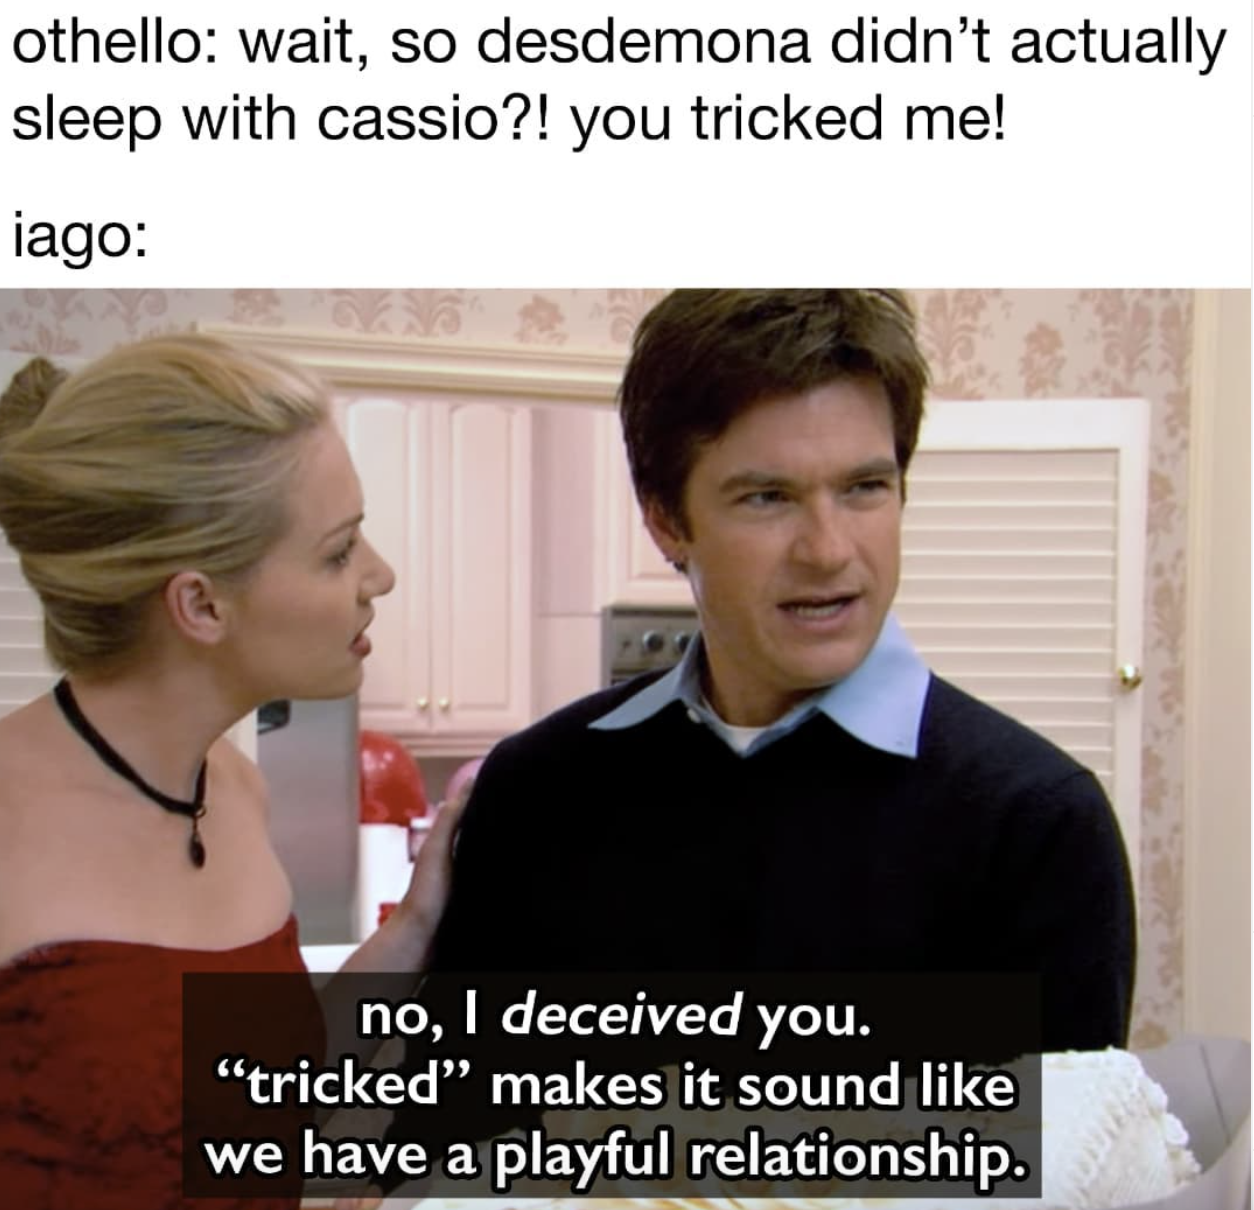 SparkNotes memes - desdemona memes - othello wait, so desdemona didn't actually sleep with cassio?! you tricked me! iago no, I deceived you. tricked" makes it sound we have a playful relationship.